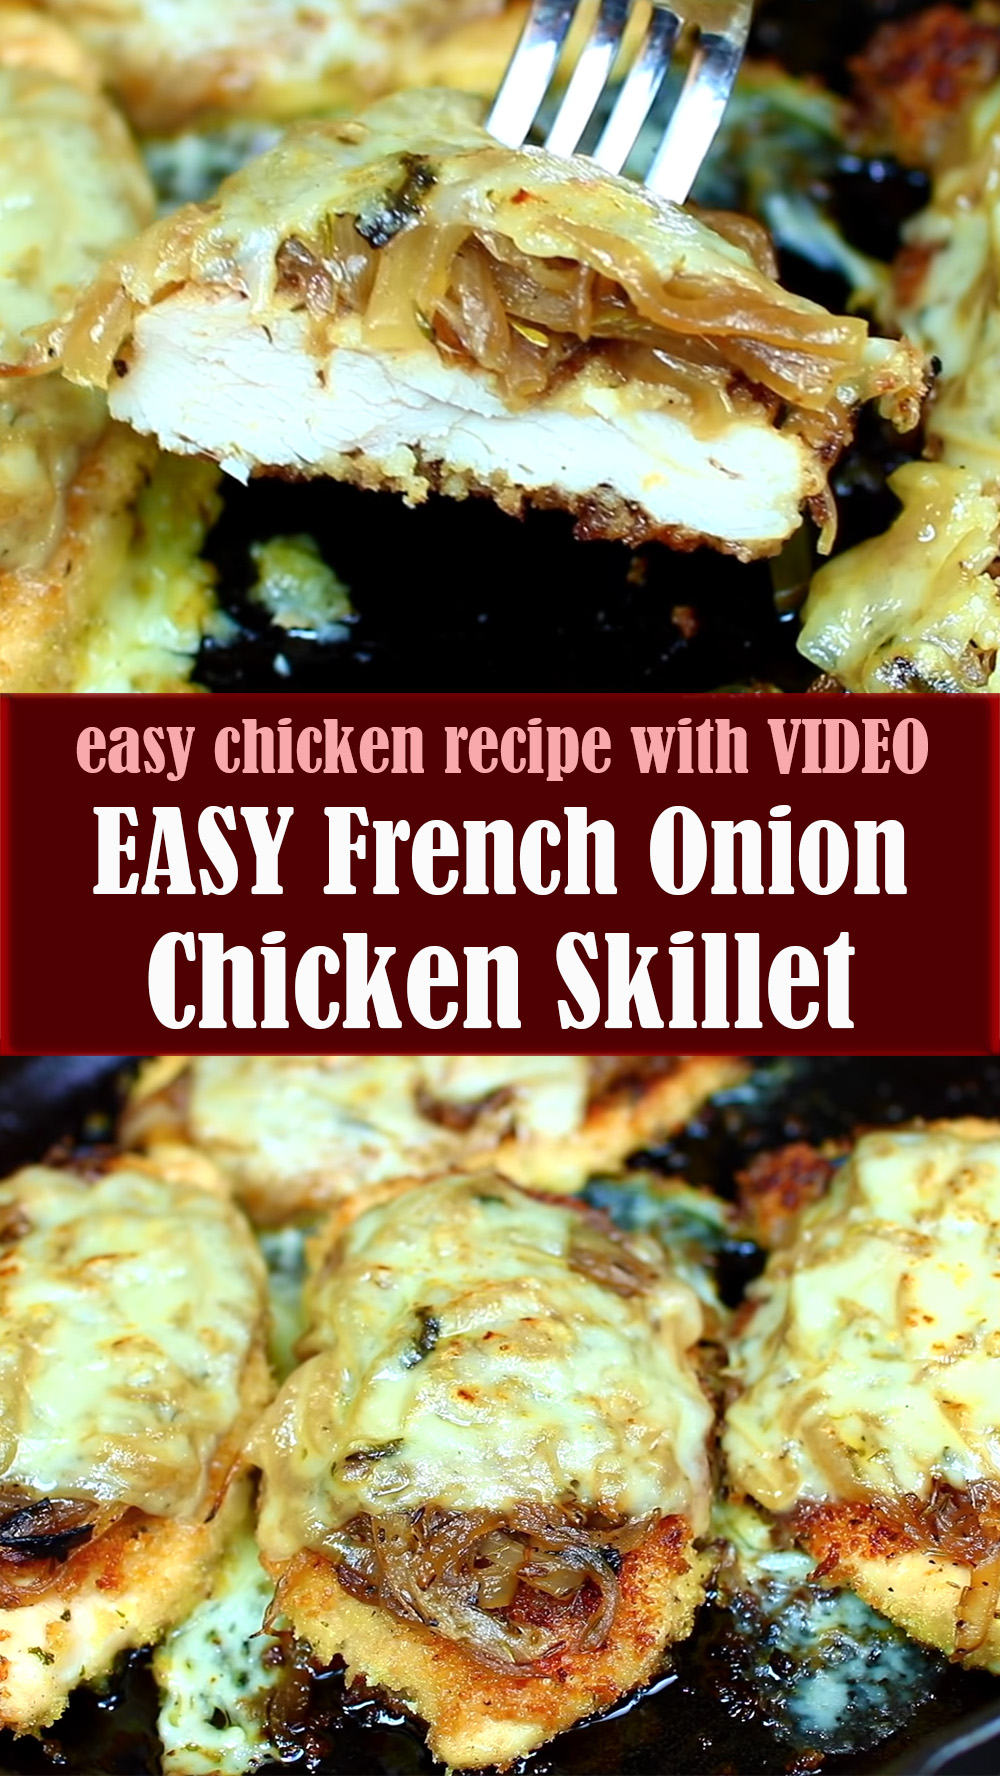 EASY French Onion Chicken Skillet